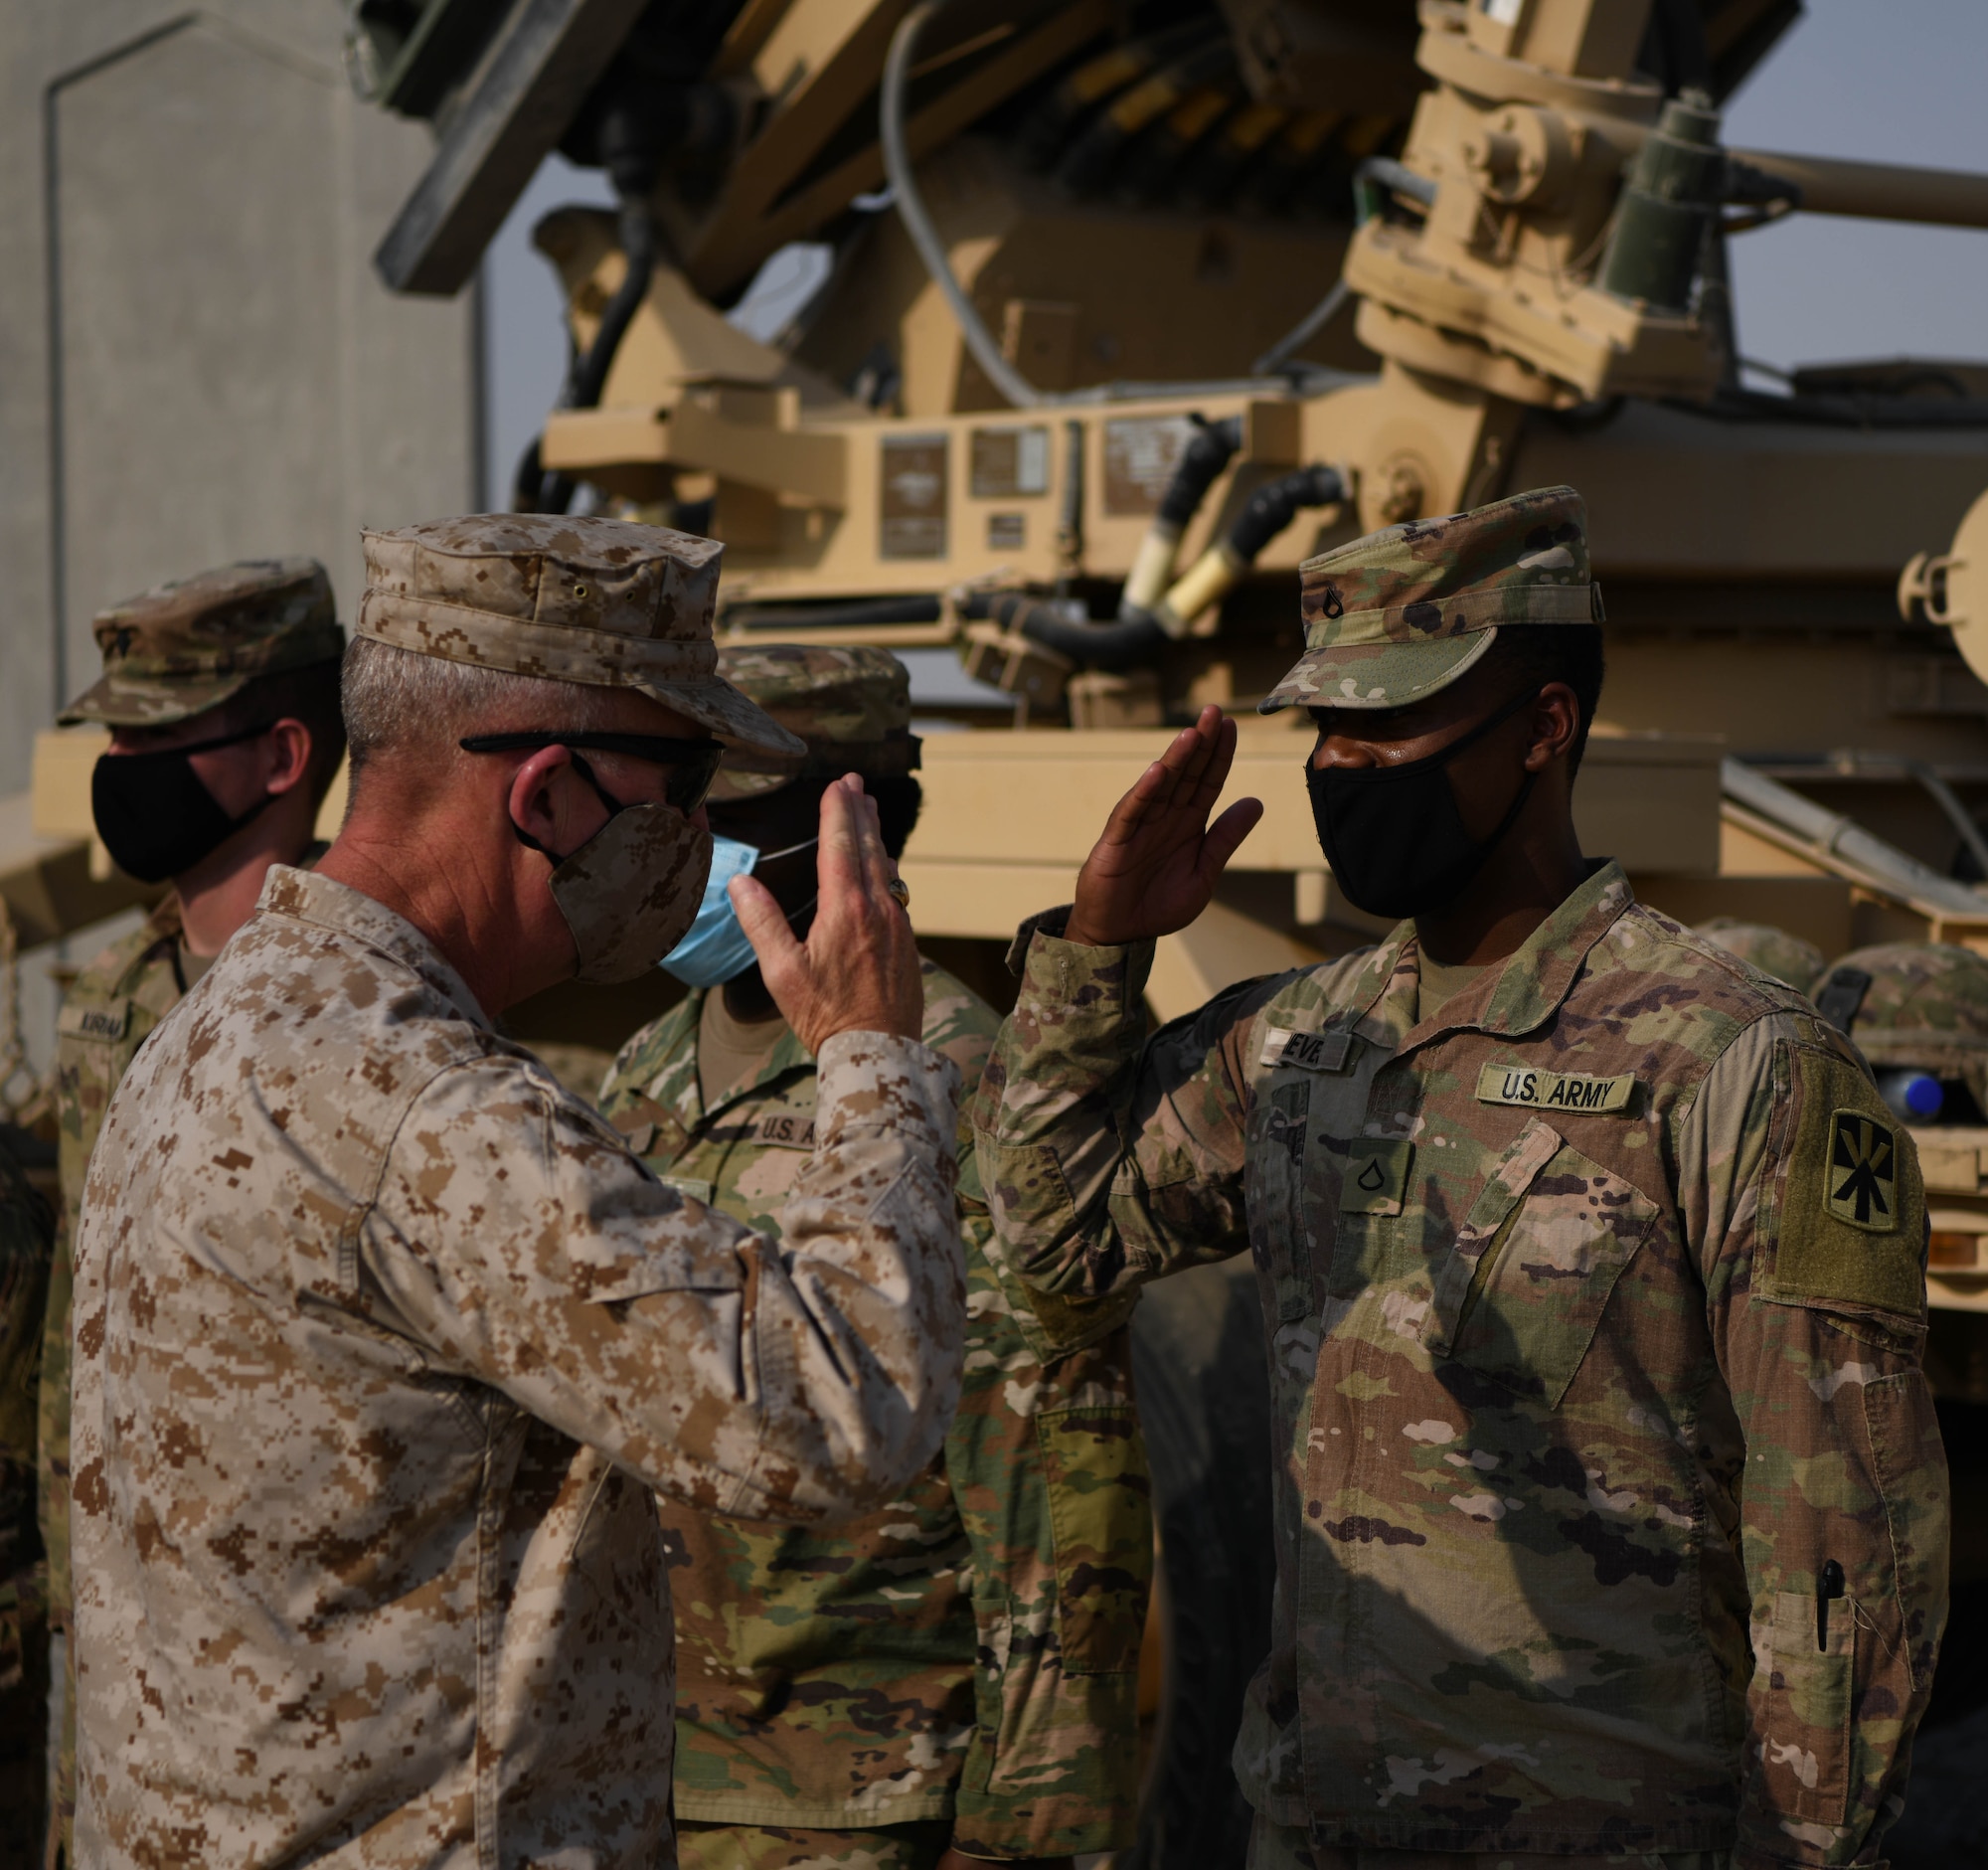 U.S. Marine Corps Gen. Kenneth F. McKenzie Jr., United States Central Command commander, salutes an Army Soldier during a visit to the Alpha Battery 5-52 Air Defense Artillery Battalion, Sept. 13, 2020, at Al Dhafra Air Base, United Arab Emirates.